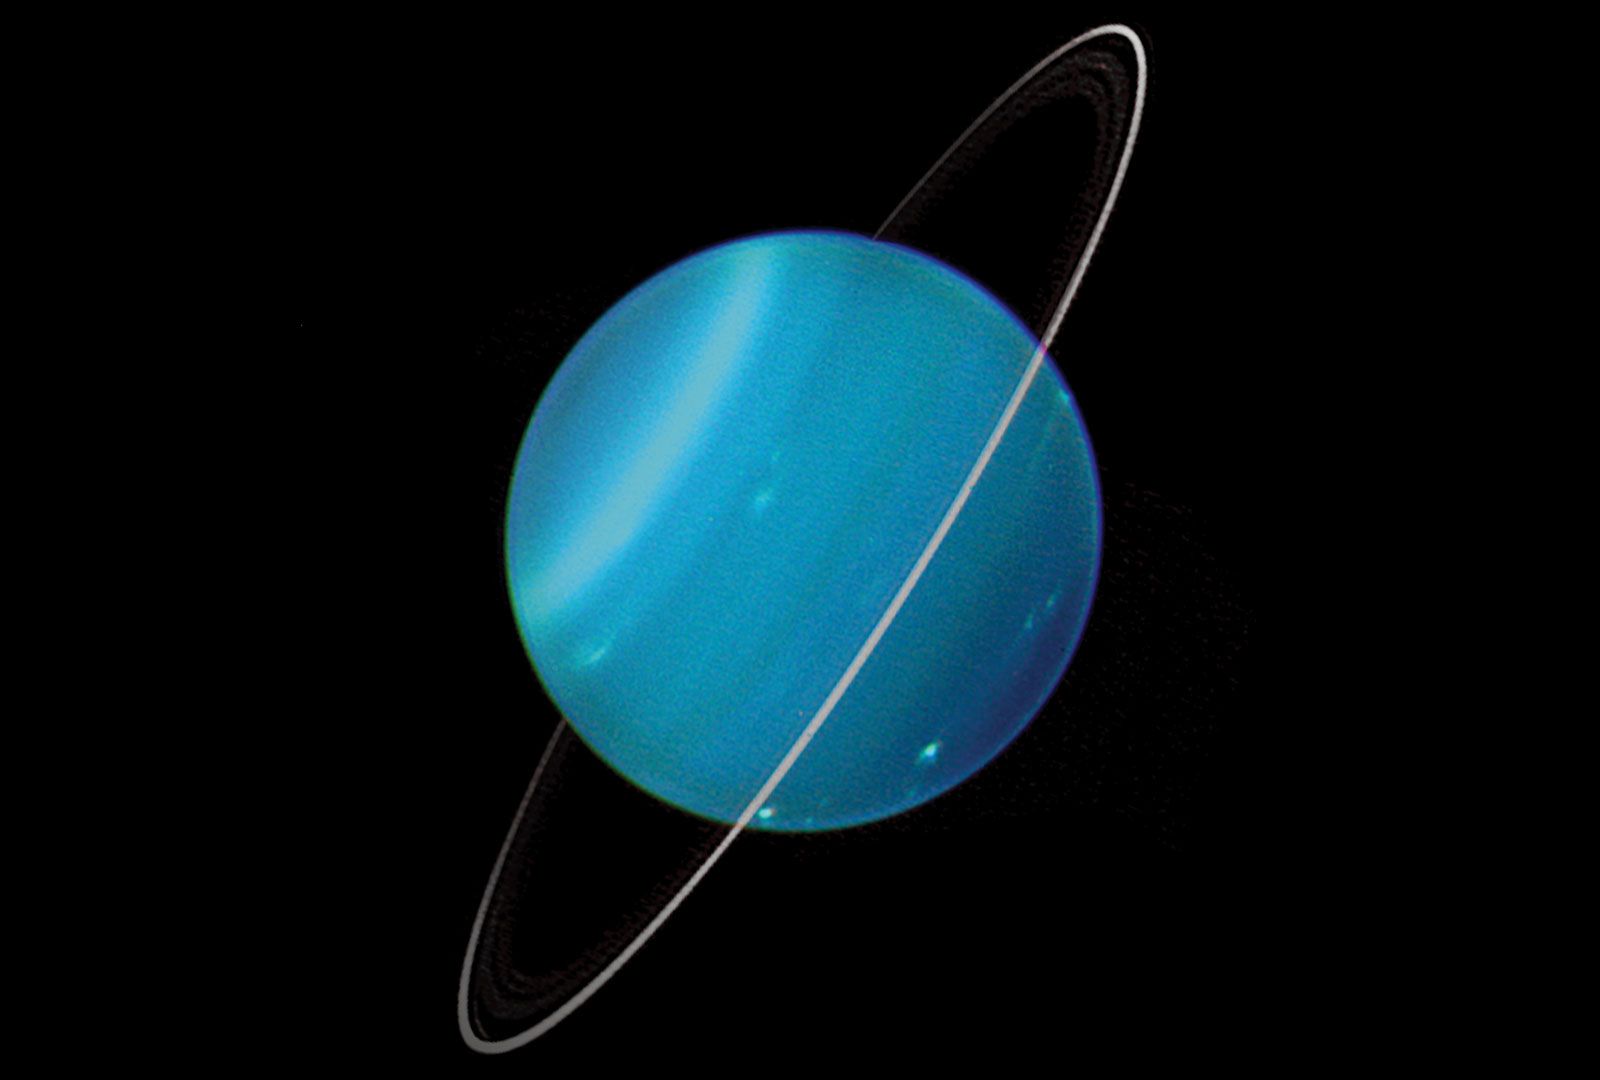 This enhanced image reveals cloud structures in the blue atmosphere of Uranus. Faint rings are visible as well.